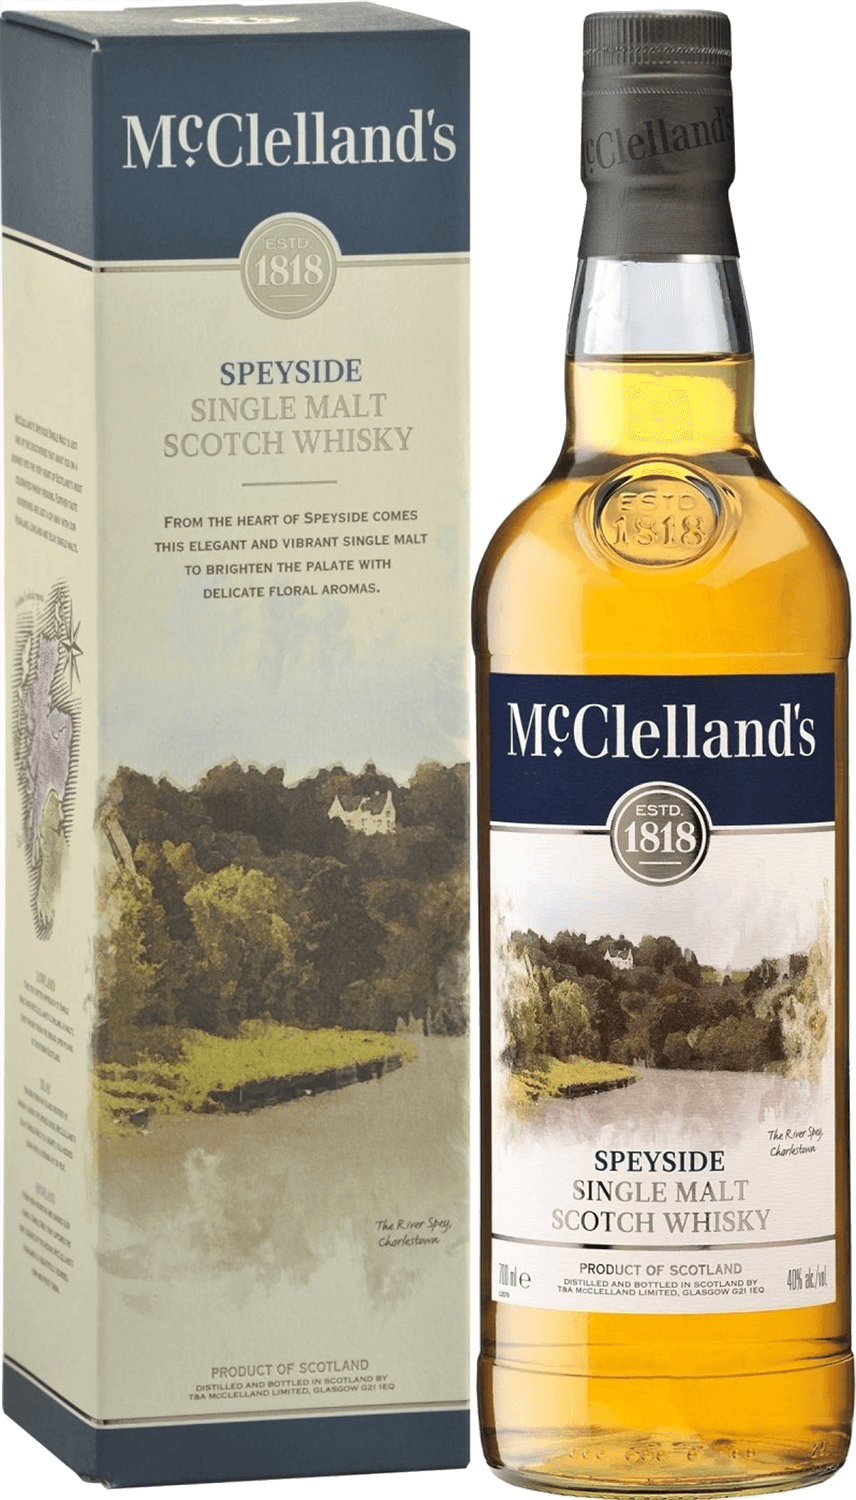 McClelland's Speyside single malt scotch whisky (gift box) aultmore 18 years old speyside single malt scotch whisky gift box